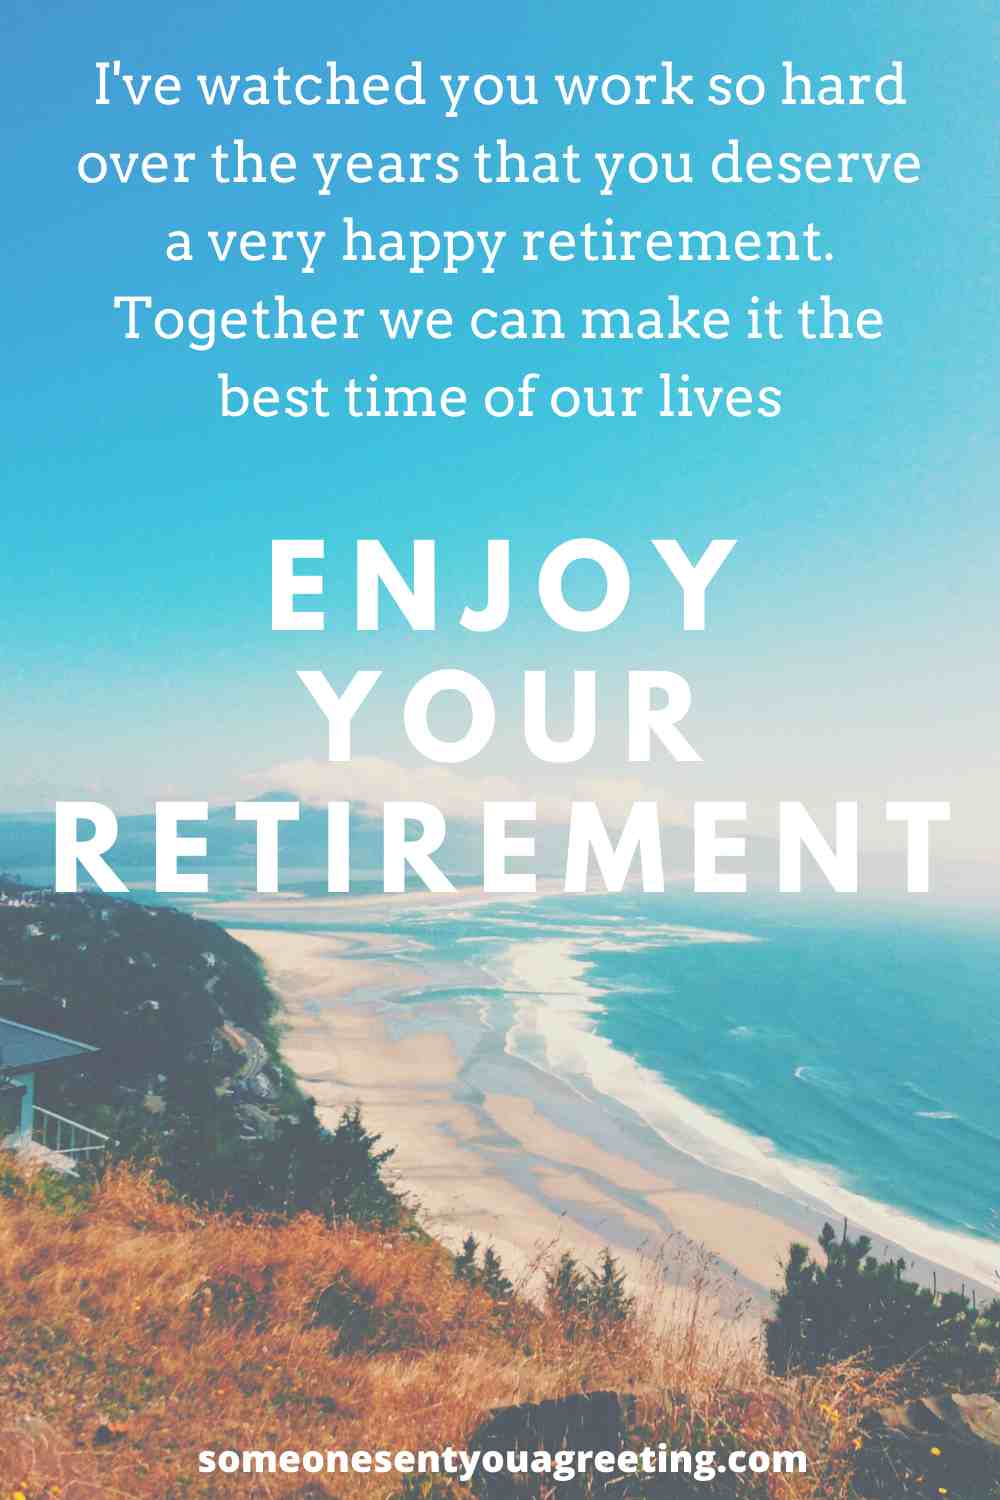 Retirement message to husband